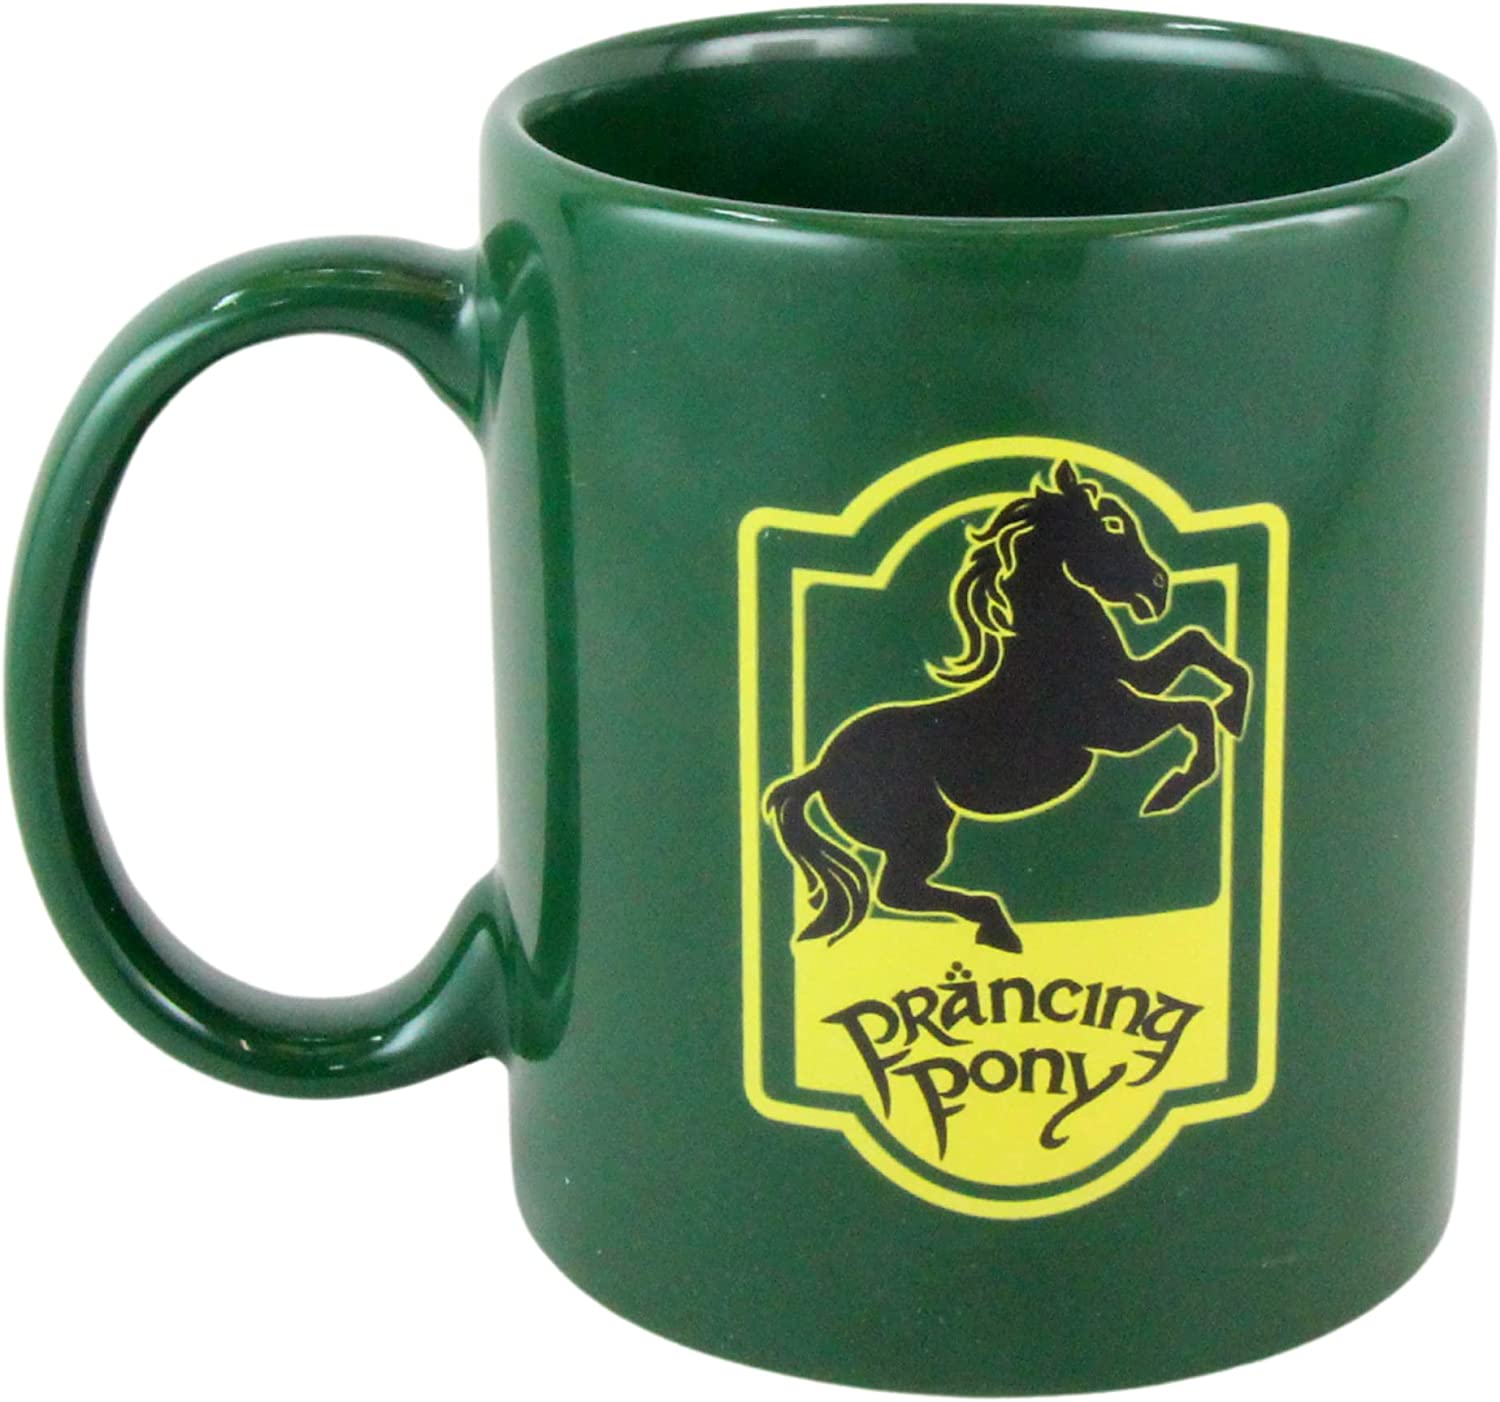 The Lord of The Rings Collectors Gift Set - Gandalf T-Shirt S, L.O.T.R. Hat & 330ml Prancing Pony Mug - Toptoys2u